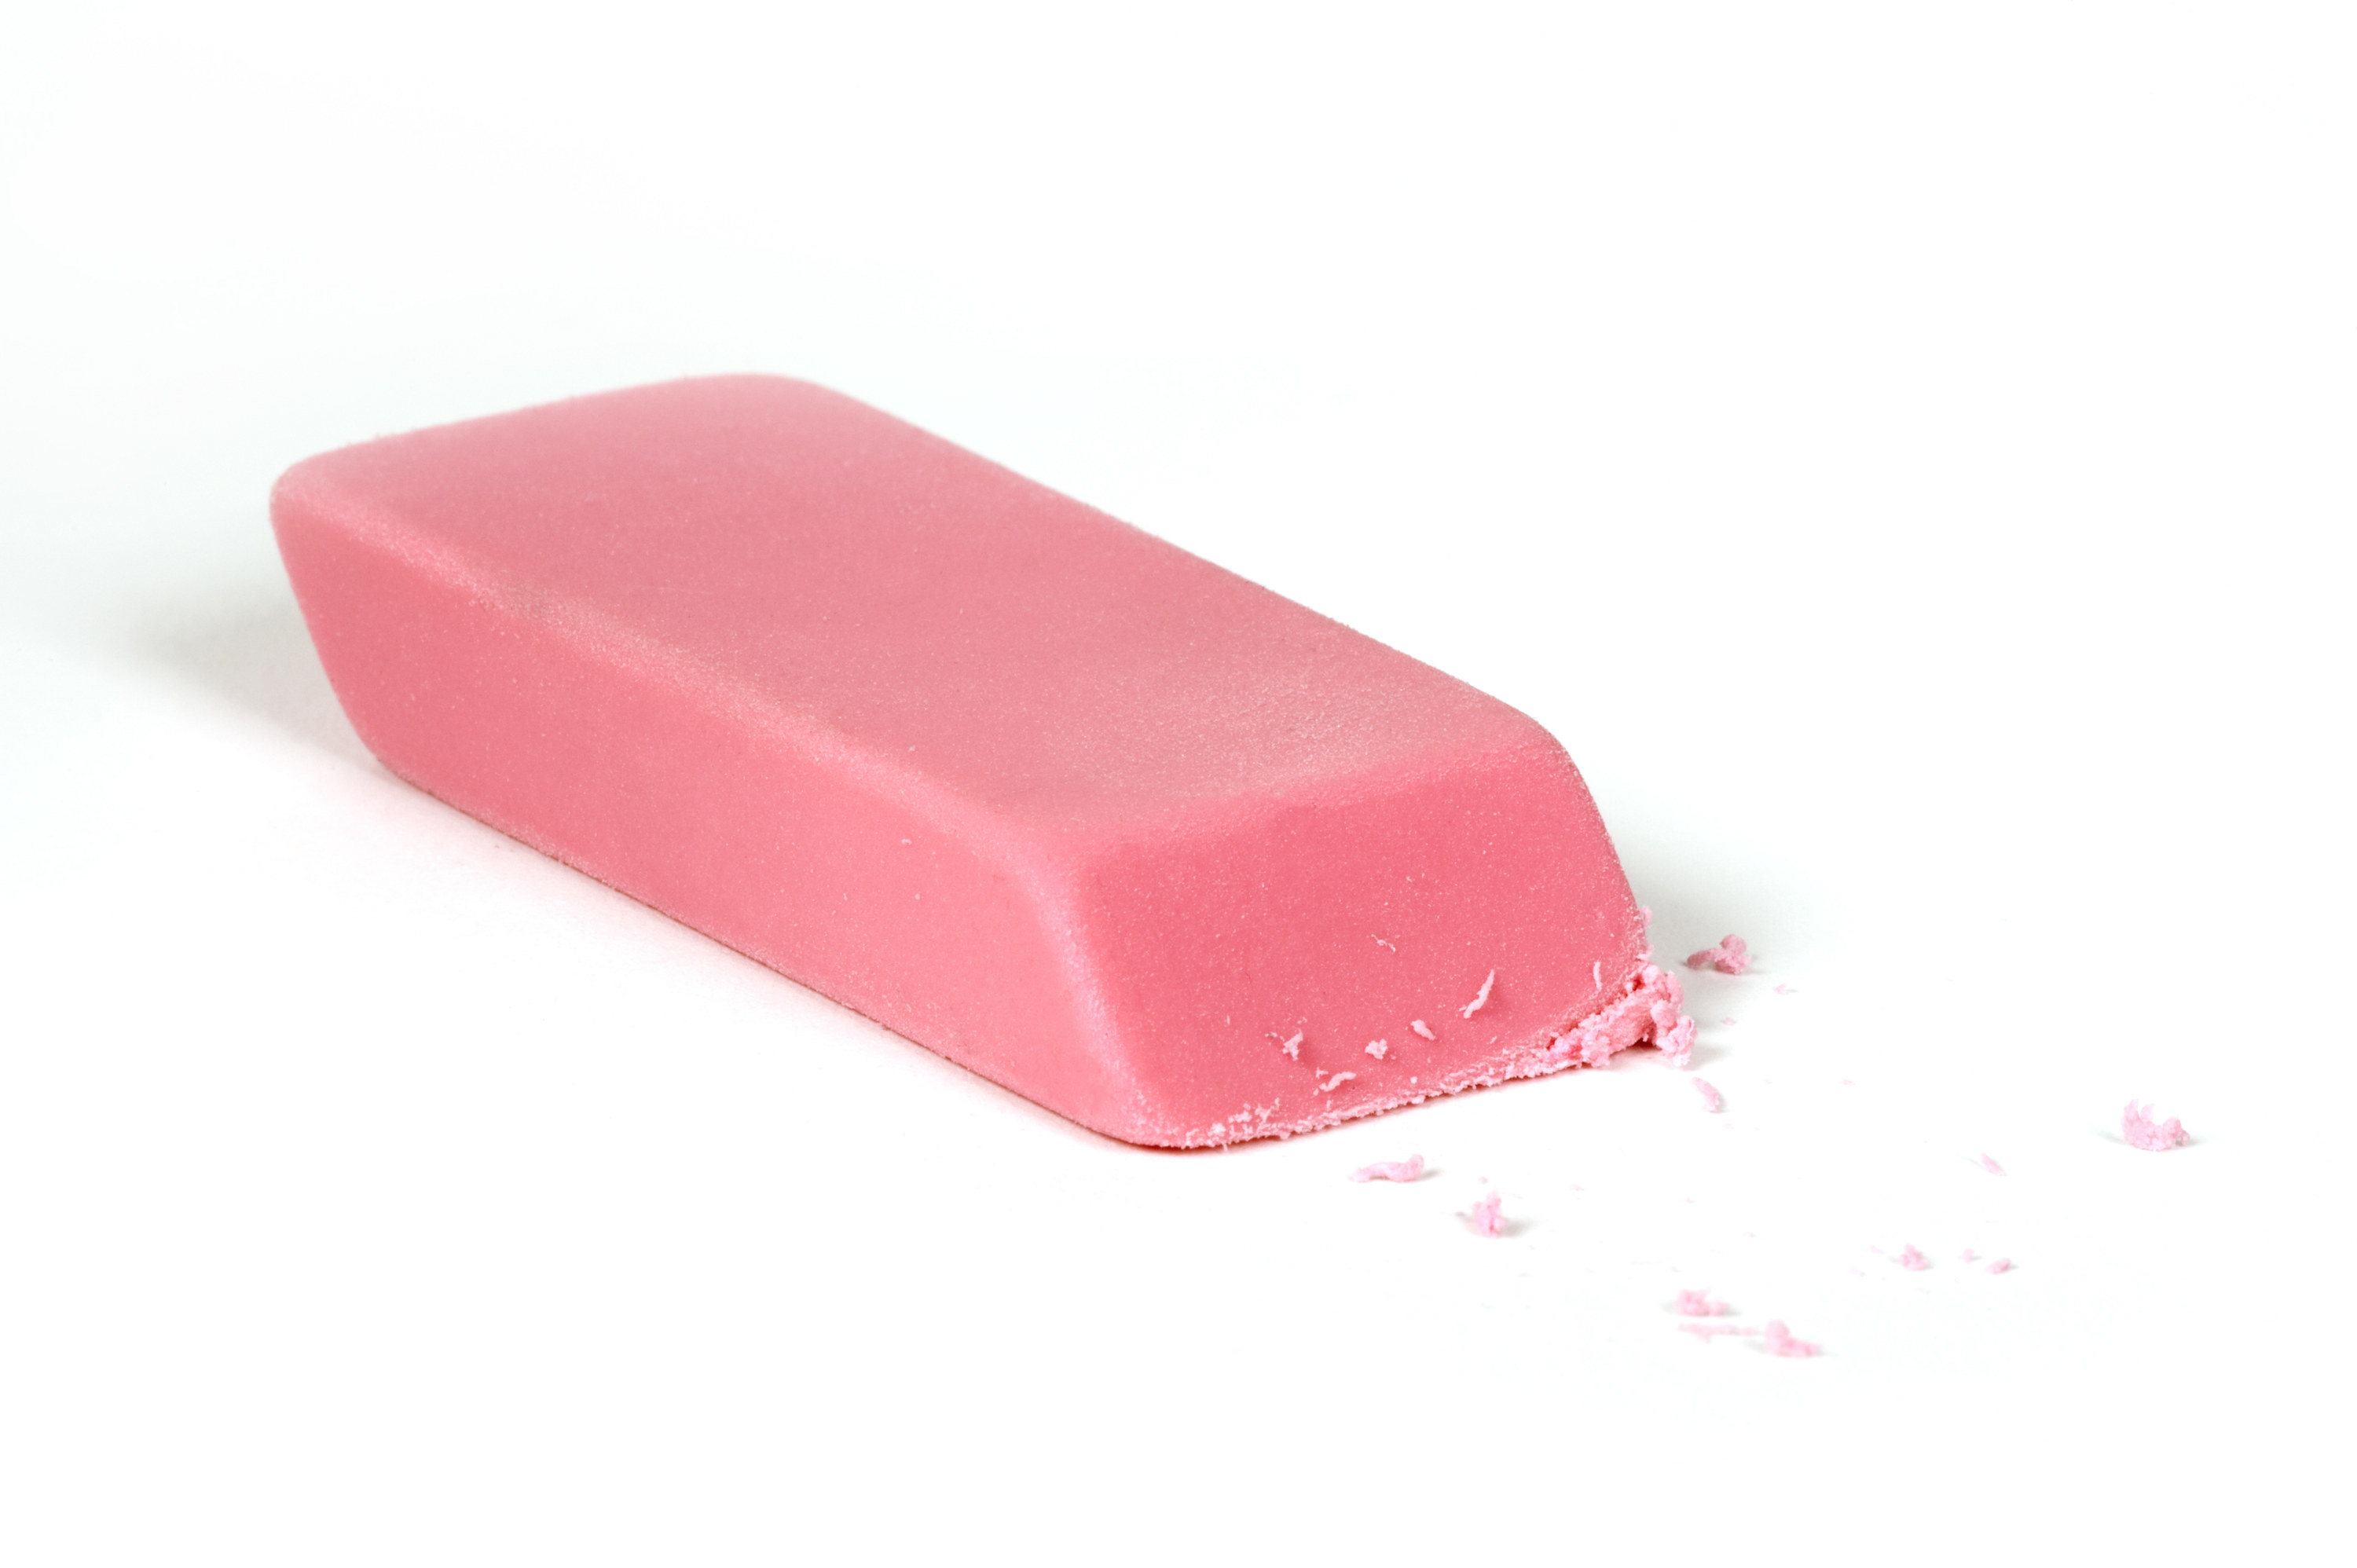 Photo of a pink eraser on a white background